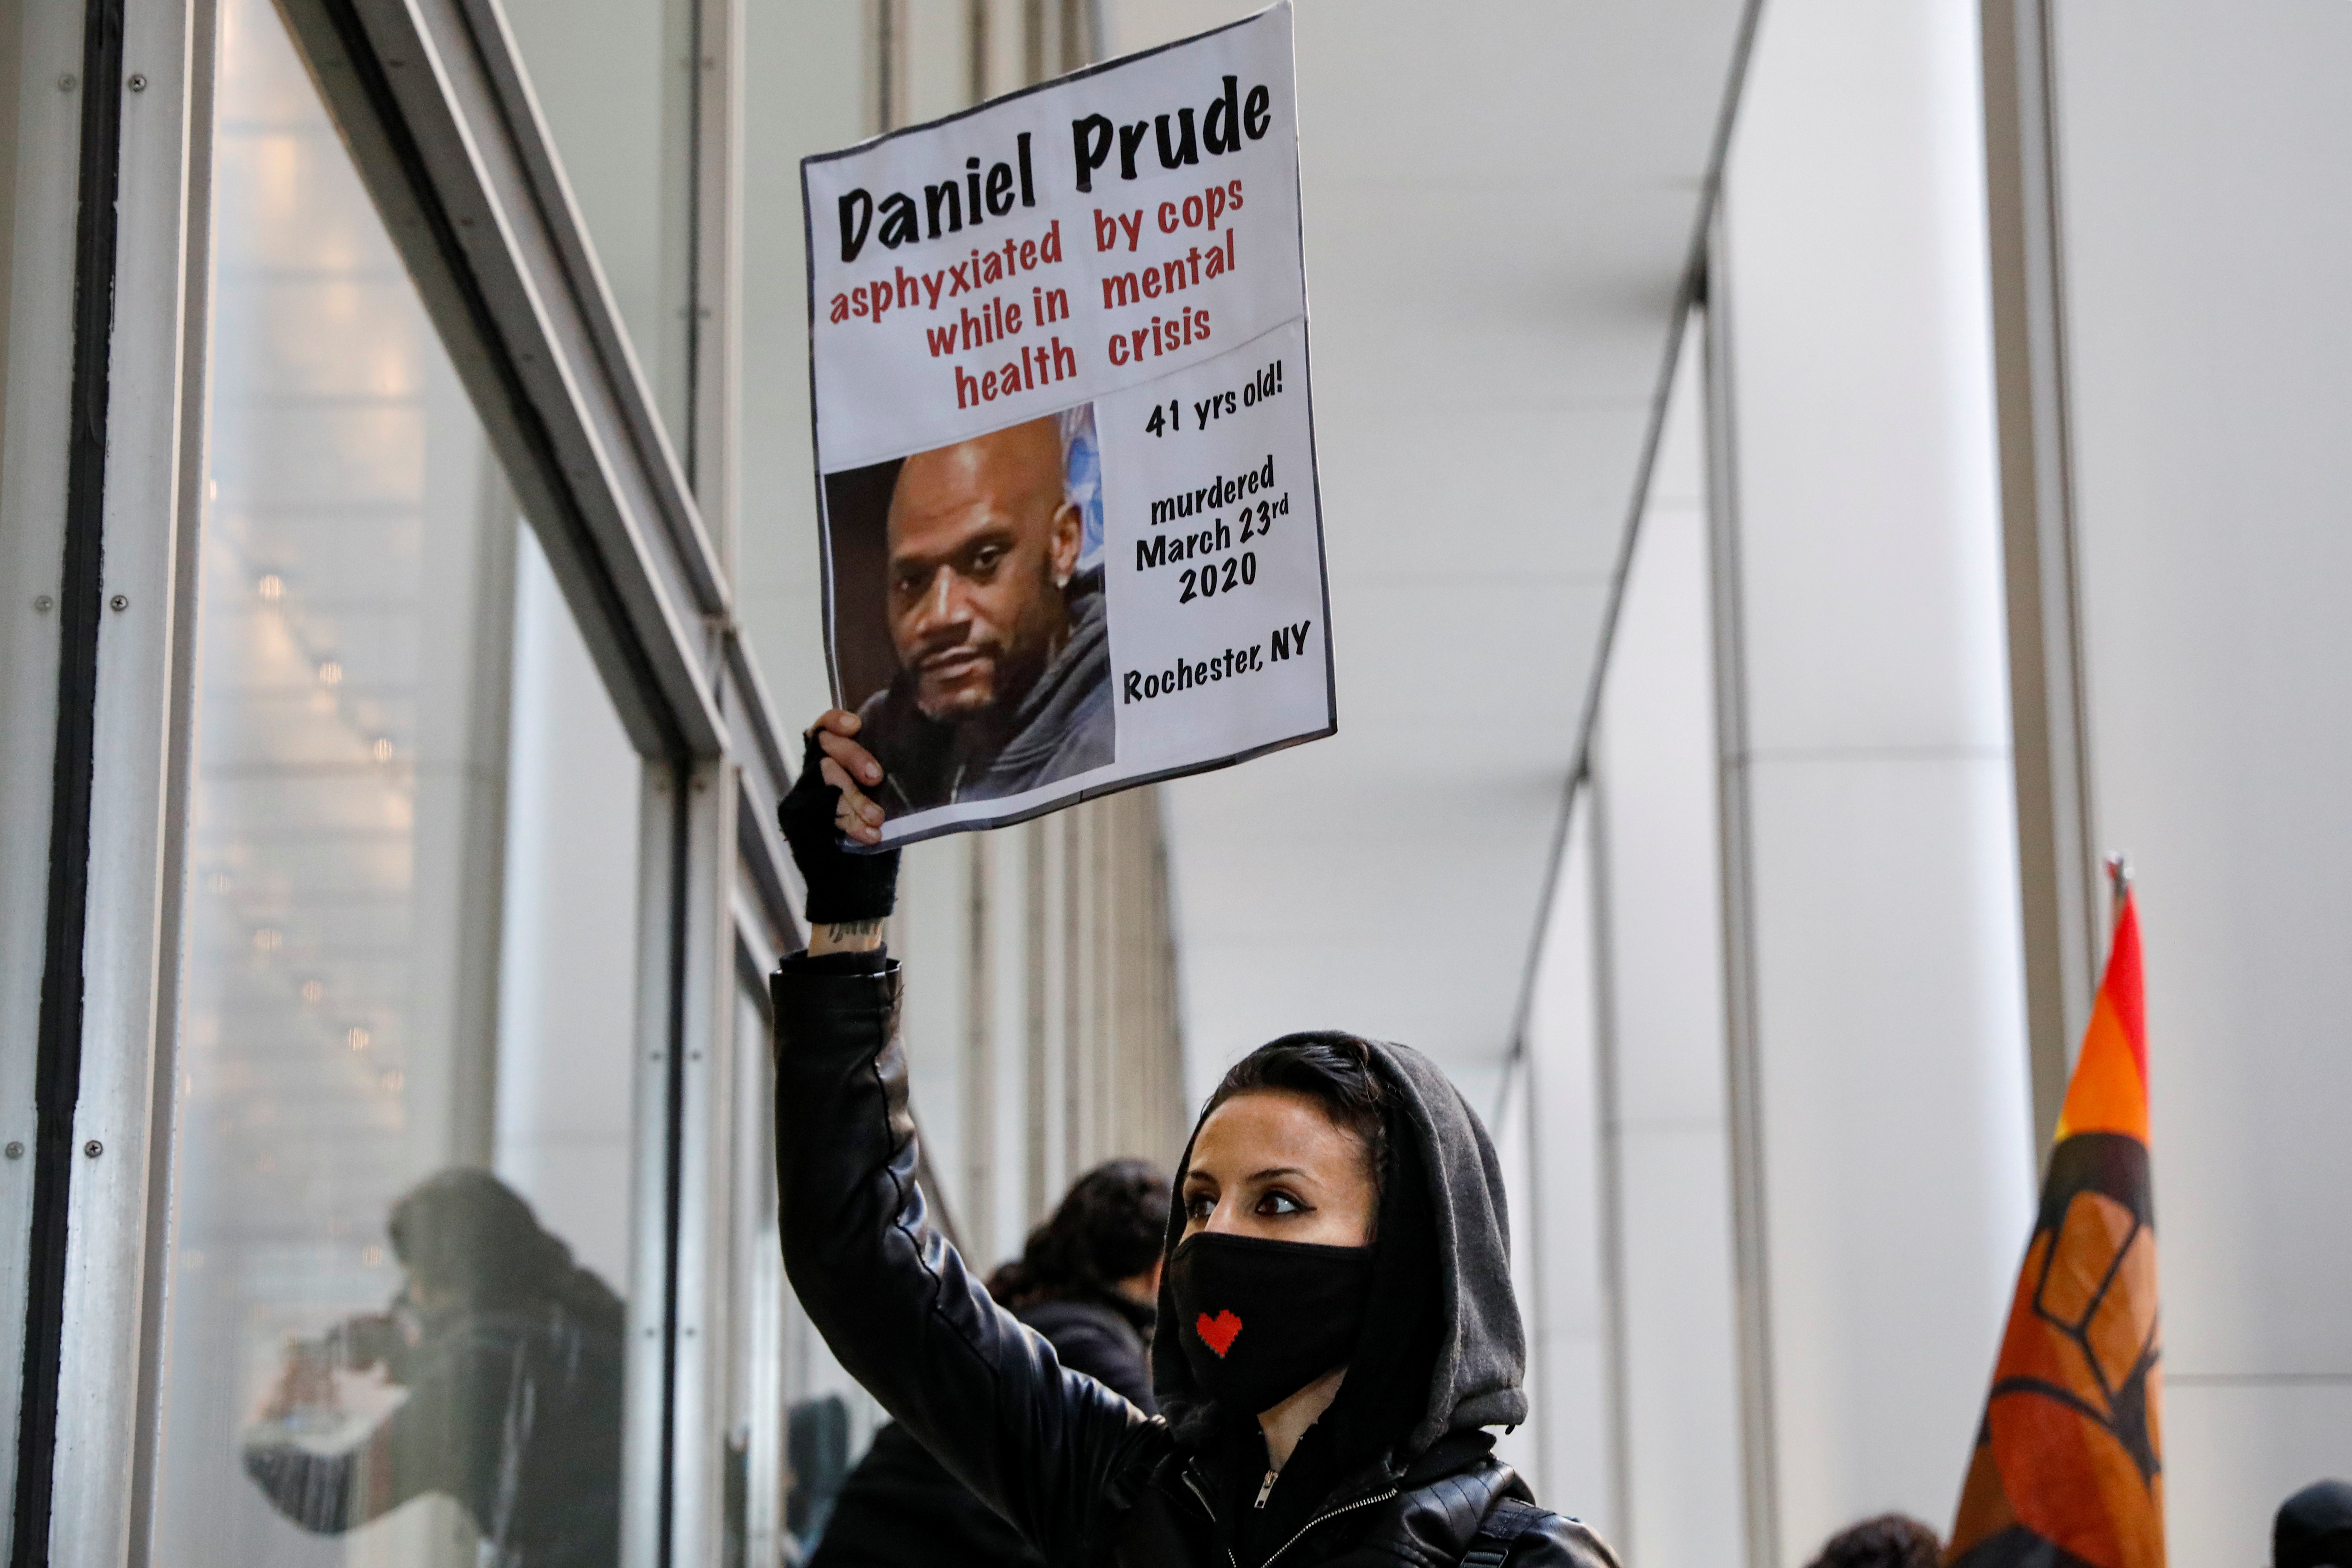 Demonstrators protest after a New York grand jury voted not to indict Rochester, New York, police officers for Daniel Prude's death, in New York